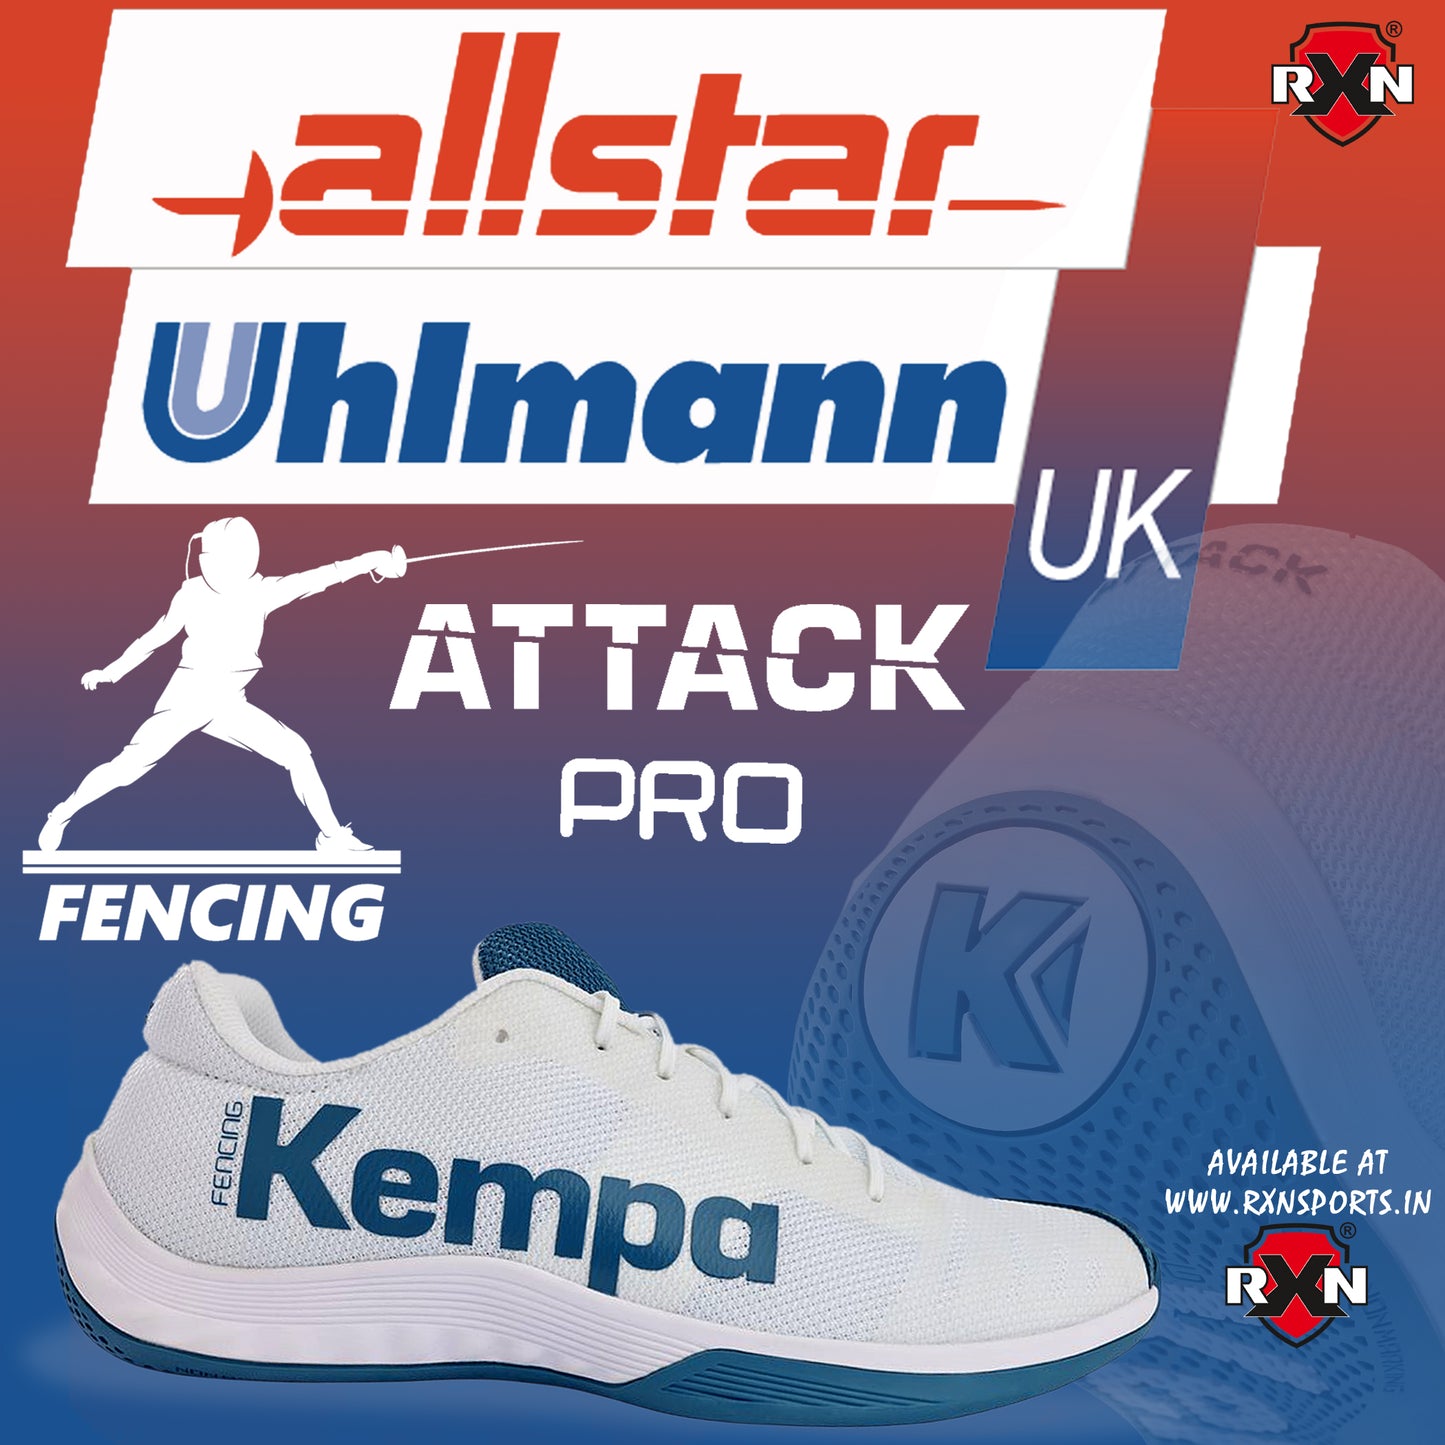 ALL STAR Kempa Shoes Attack Pro Fencing Shoes